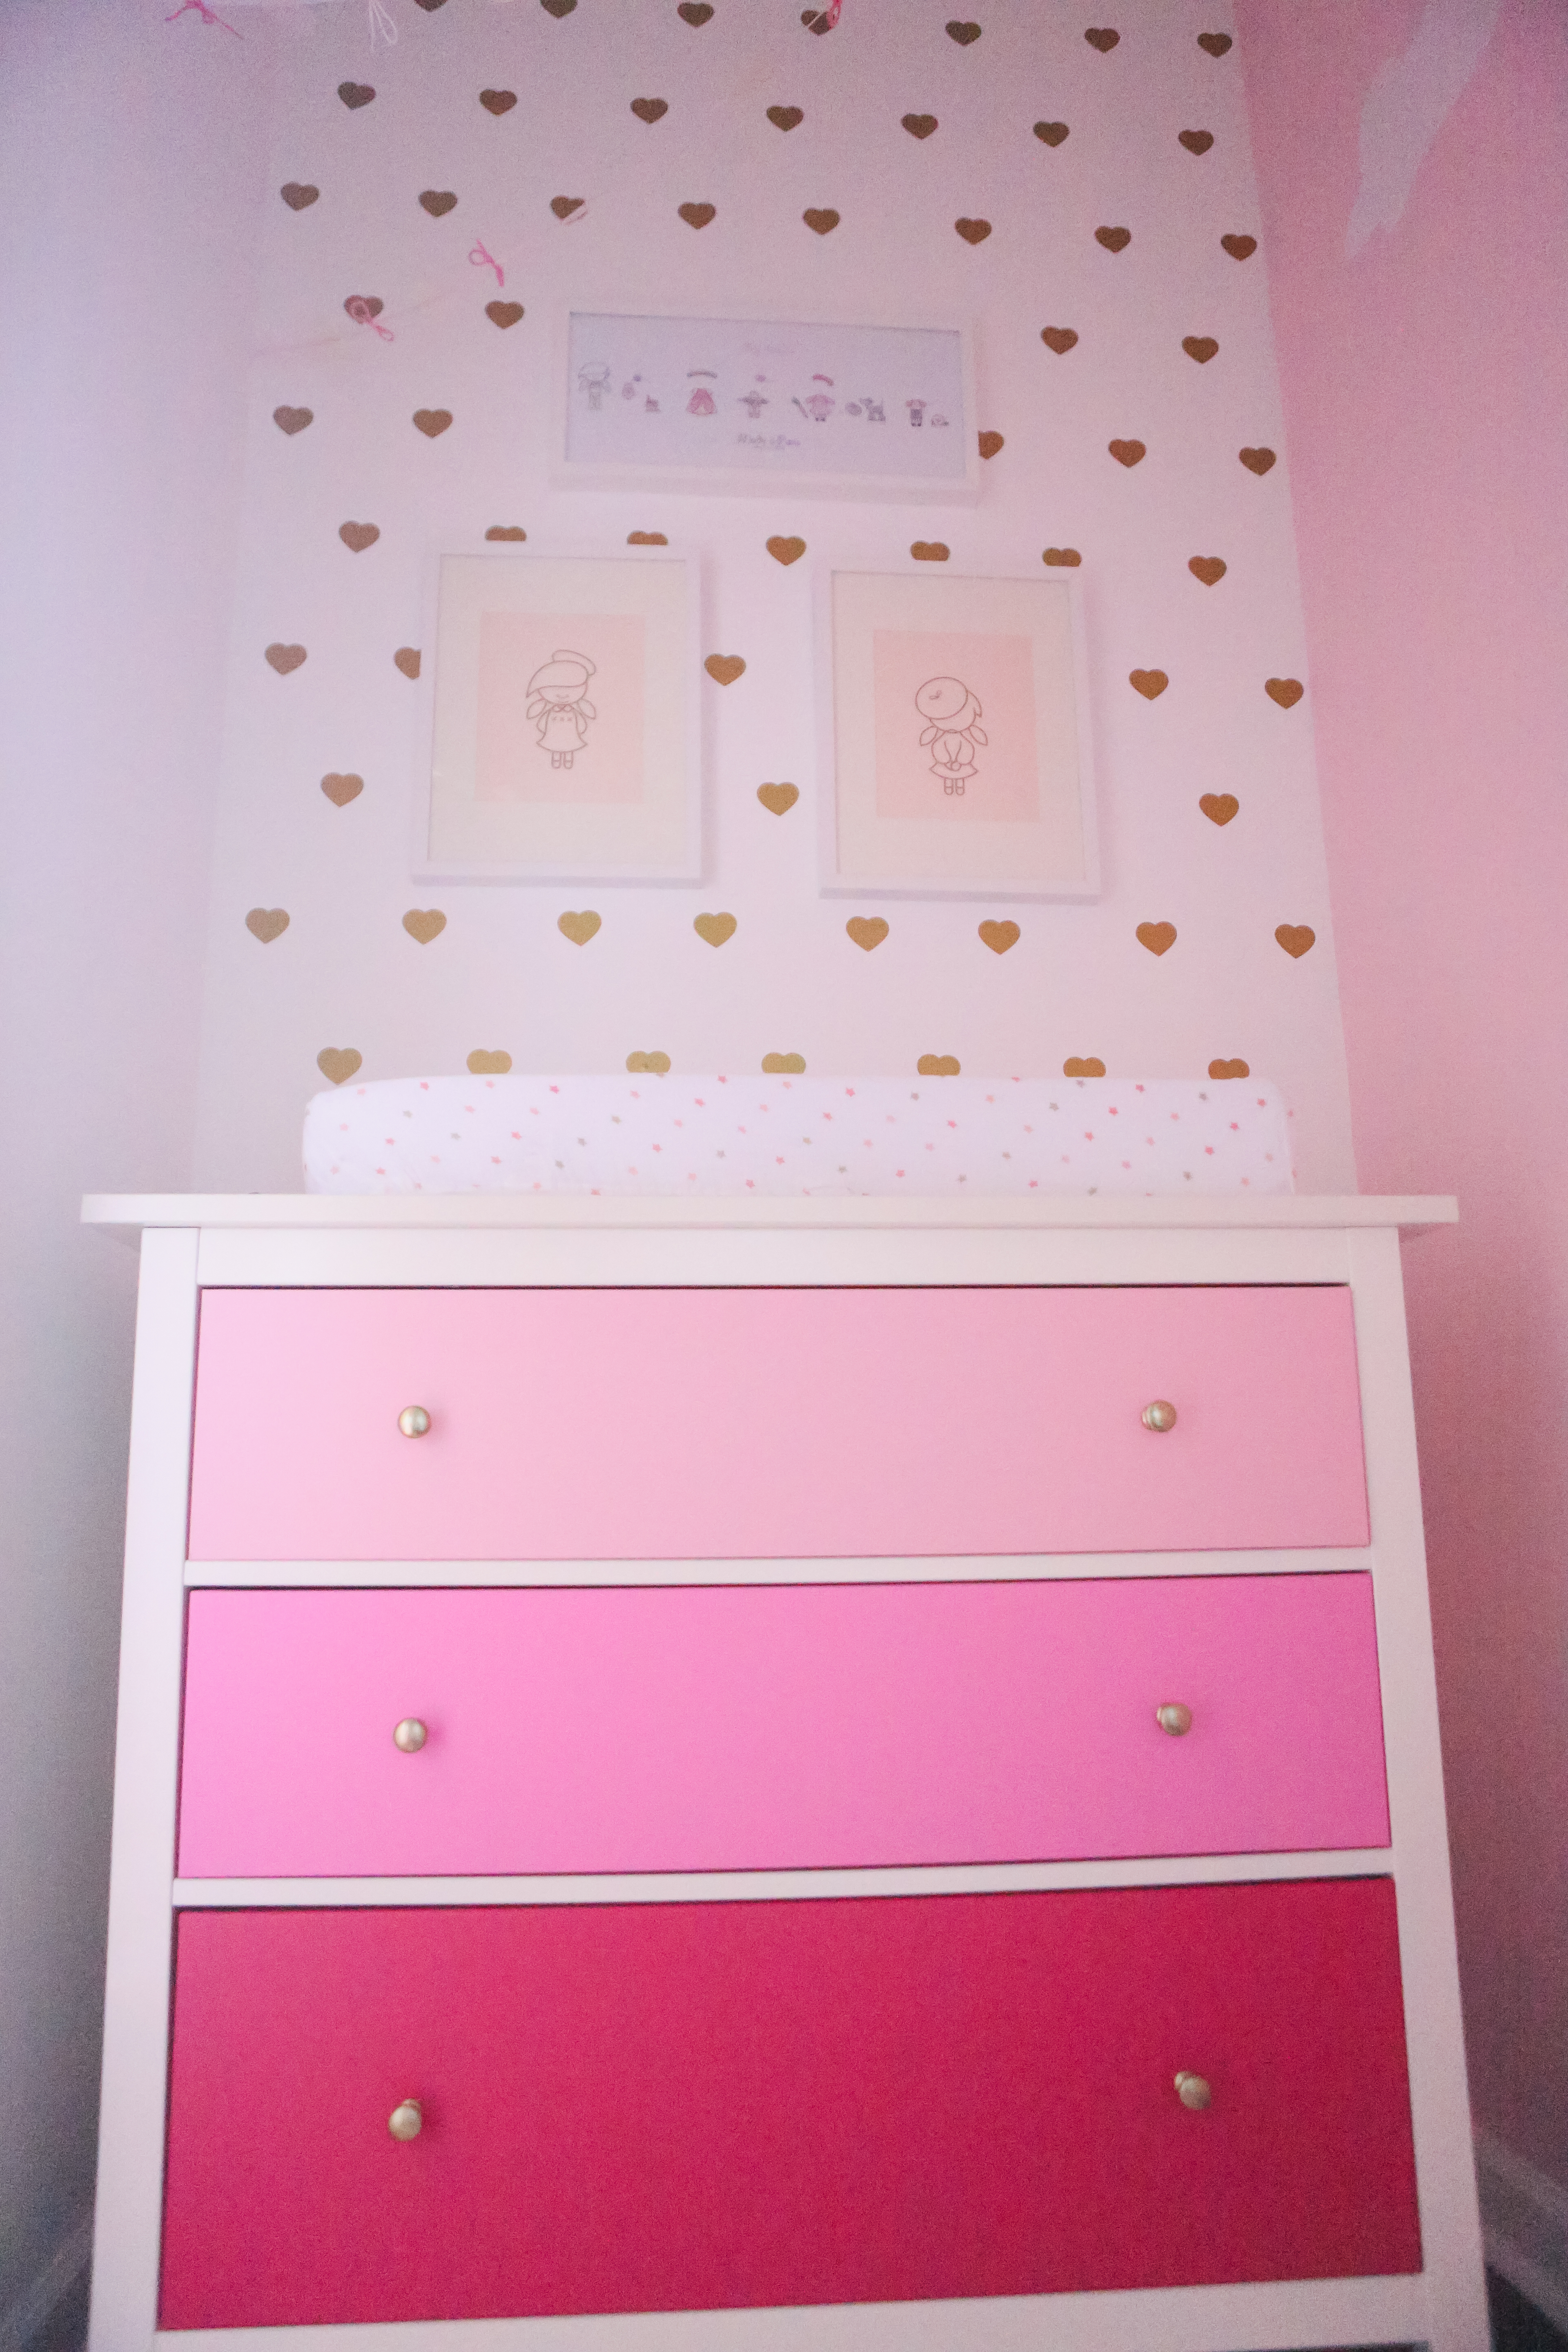 Pink Ombre Dresser and Gold Heart Wall Decals on the Wall